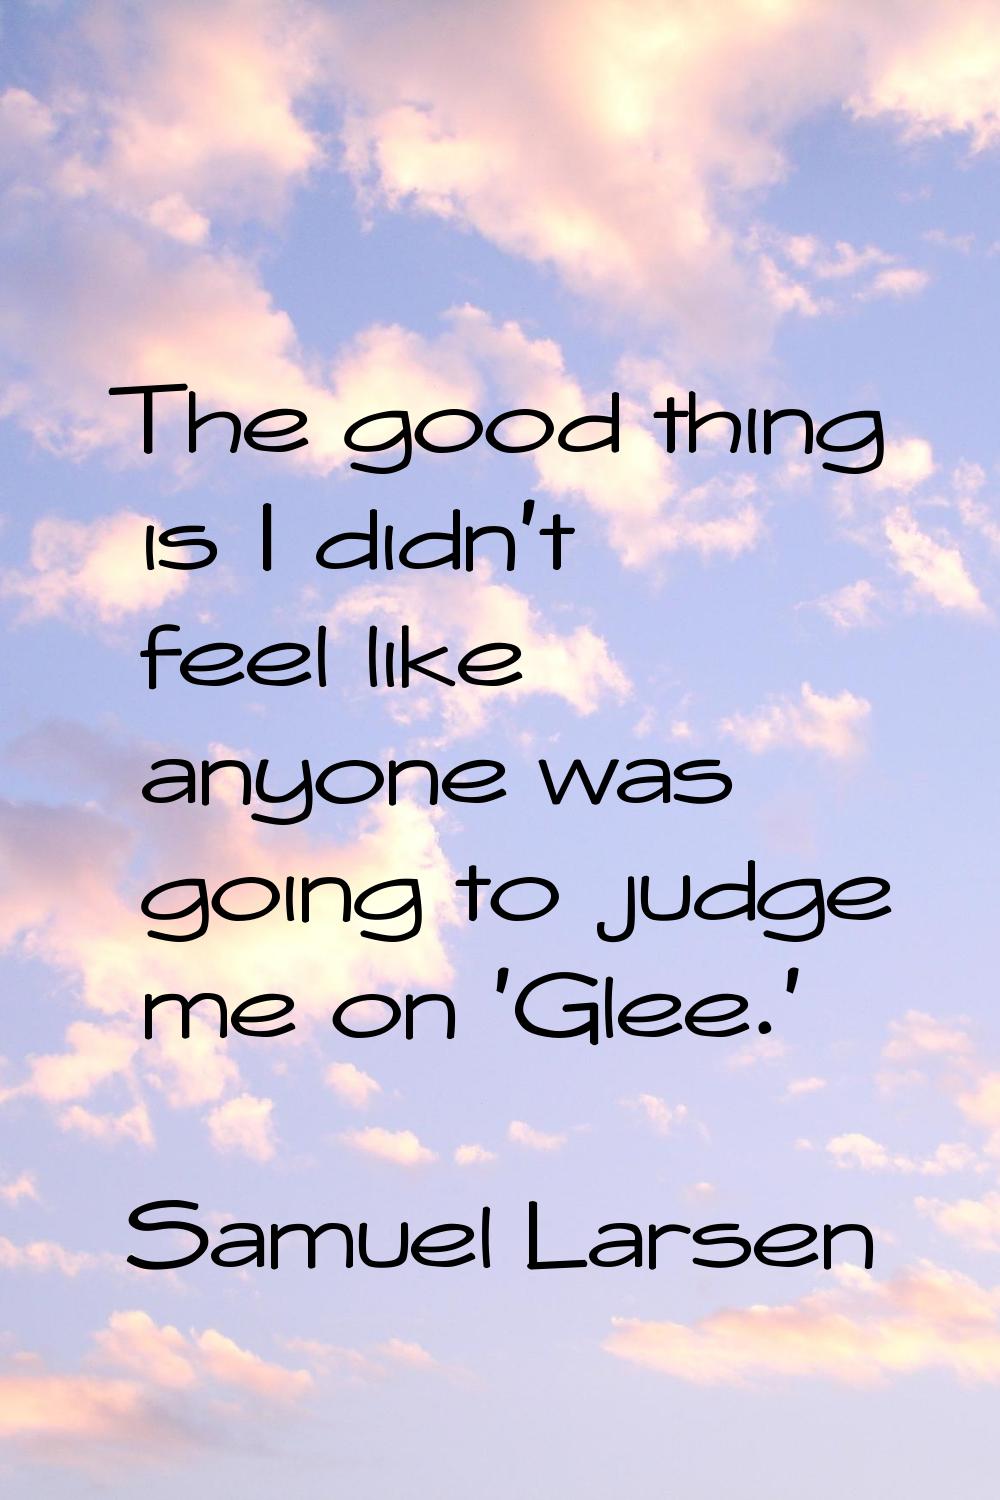 The good thing is I didn't feel like anyone was going to judge me on 'Glee.'